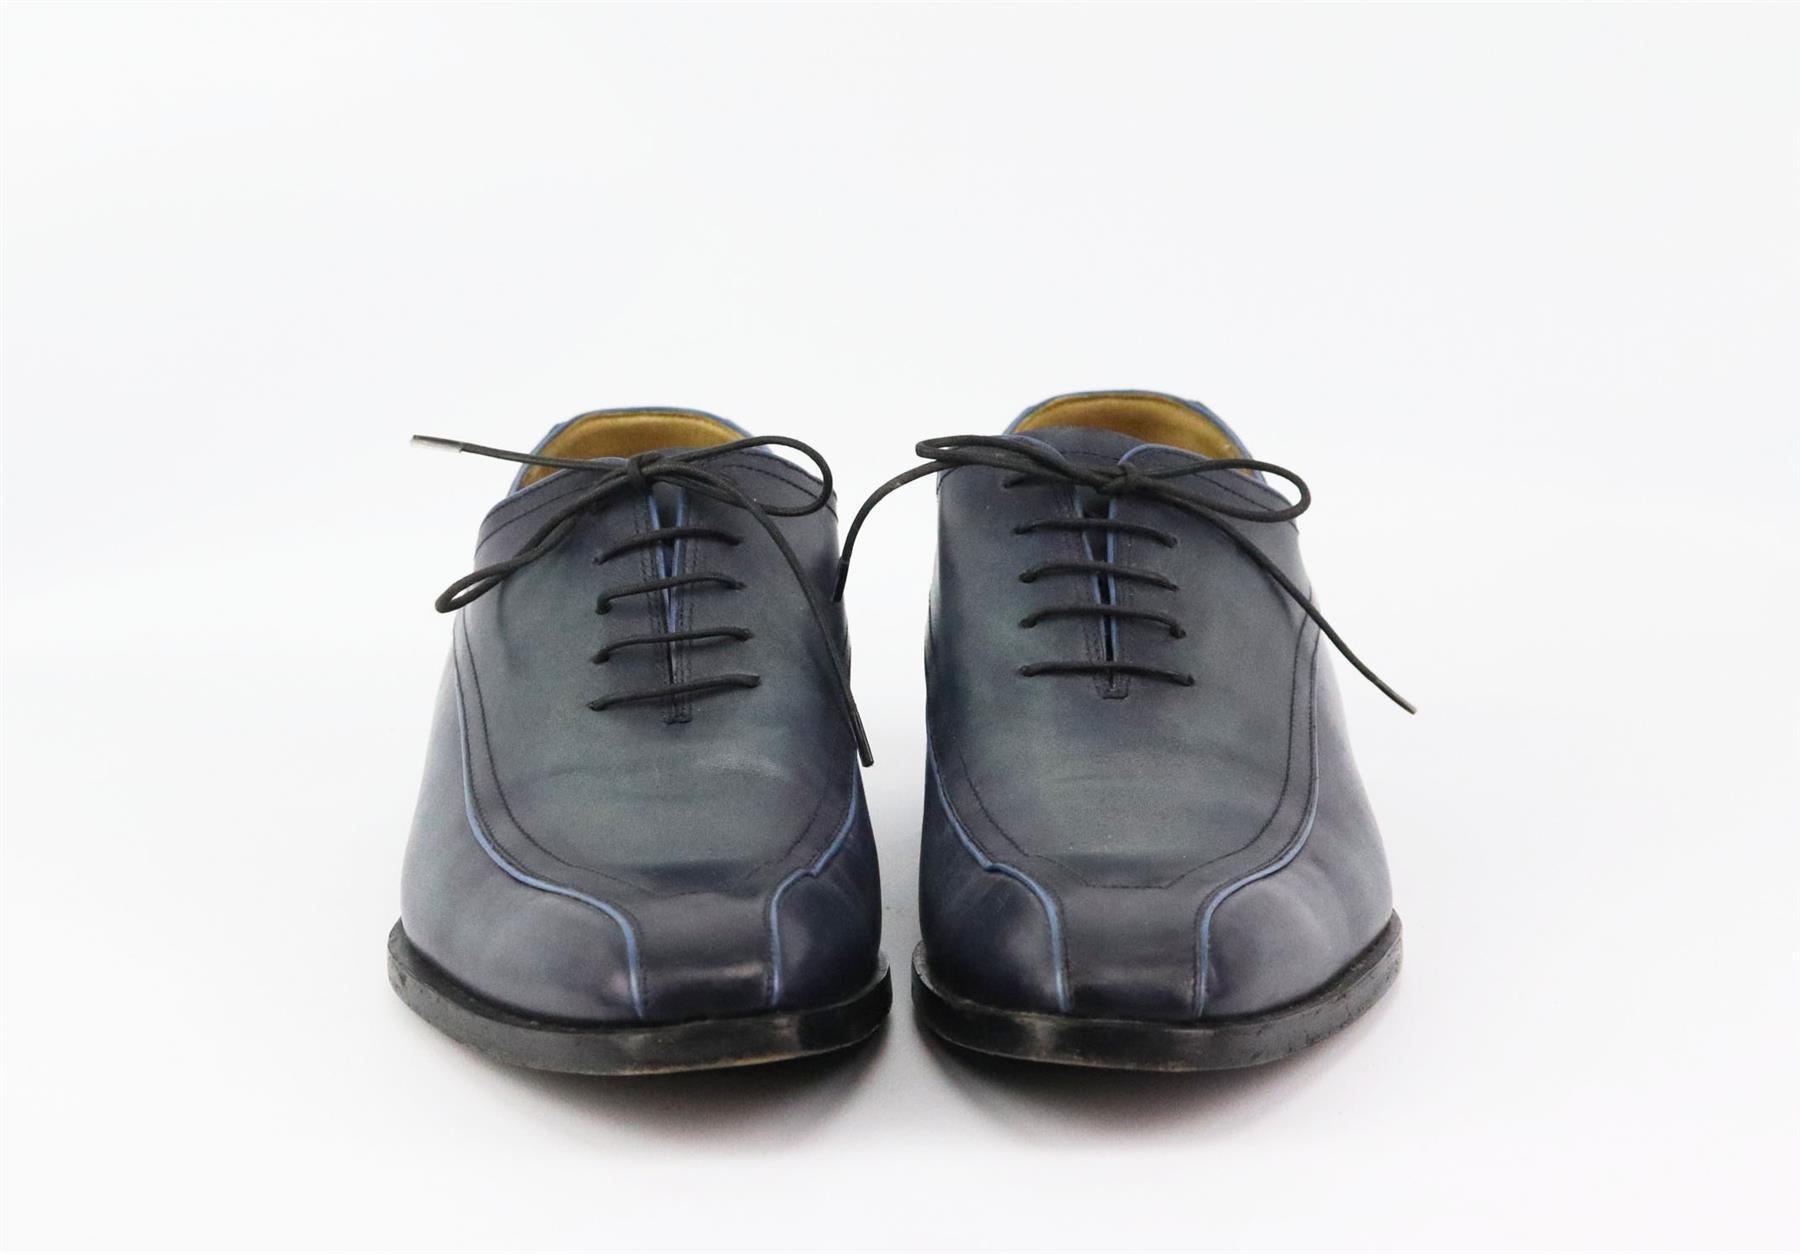 These men’s oxford shoes by Berluti are a modern update to the classic loafer, these lace-up shoes come in sleek intentionally faded navy leather with  wooden soles. Heel measures approximately 25mm/ 1 inch. Navy leather. Lace-up fastening at front.